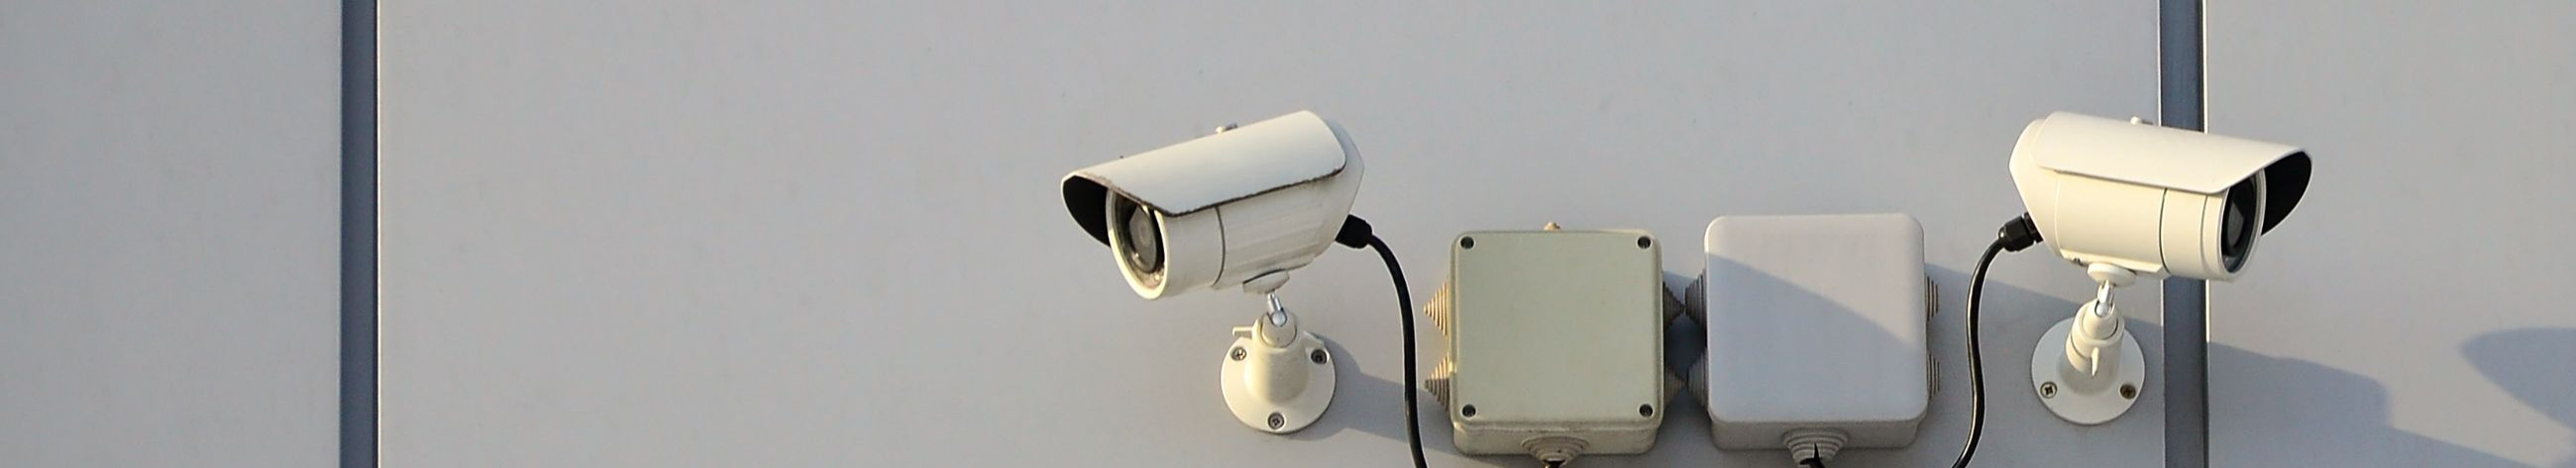 Installation work of the security alarm system, installation and maintenance of video surveillance systems, connecting solar panels, solar panels, solar panel system maintenance, solar panel technology, video surveillance system installation, CCTV maintenance services, security camera system setup, solar panel connection services